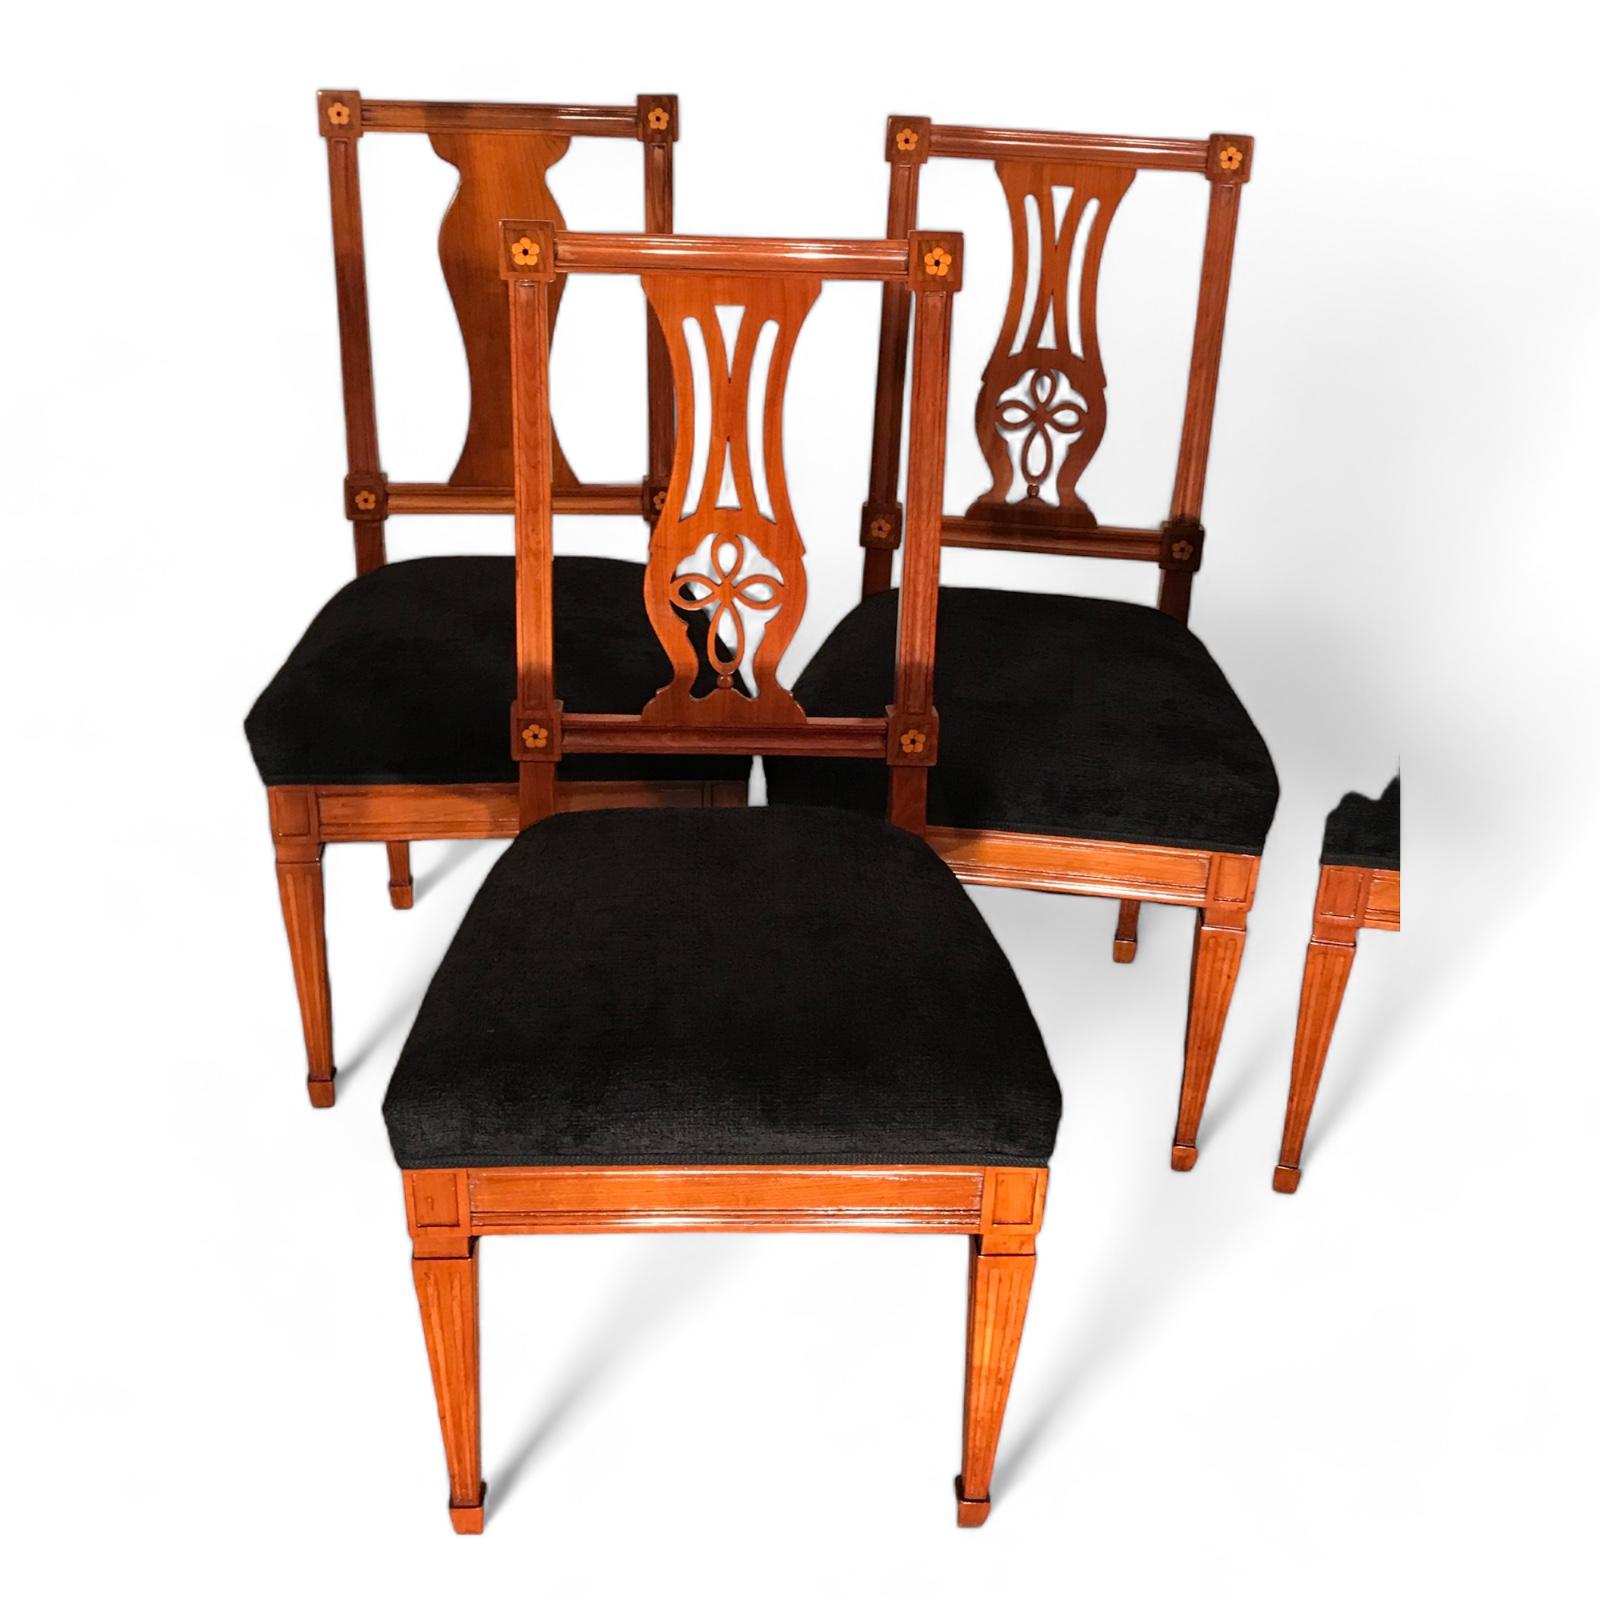 Set of Six Neoclassical Chairs
Discover a rare find with our exquisite set of six Neoclassical chairs originating from around 1800’s Southern Germany. Crafted from cherry wood veneer adorned with intricate inlaid rosette decor, these chairs exude